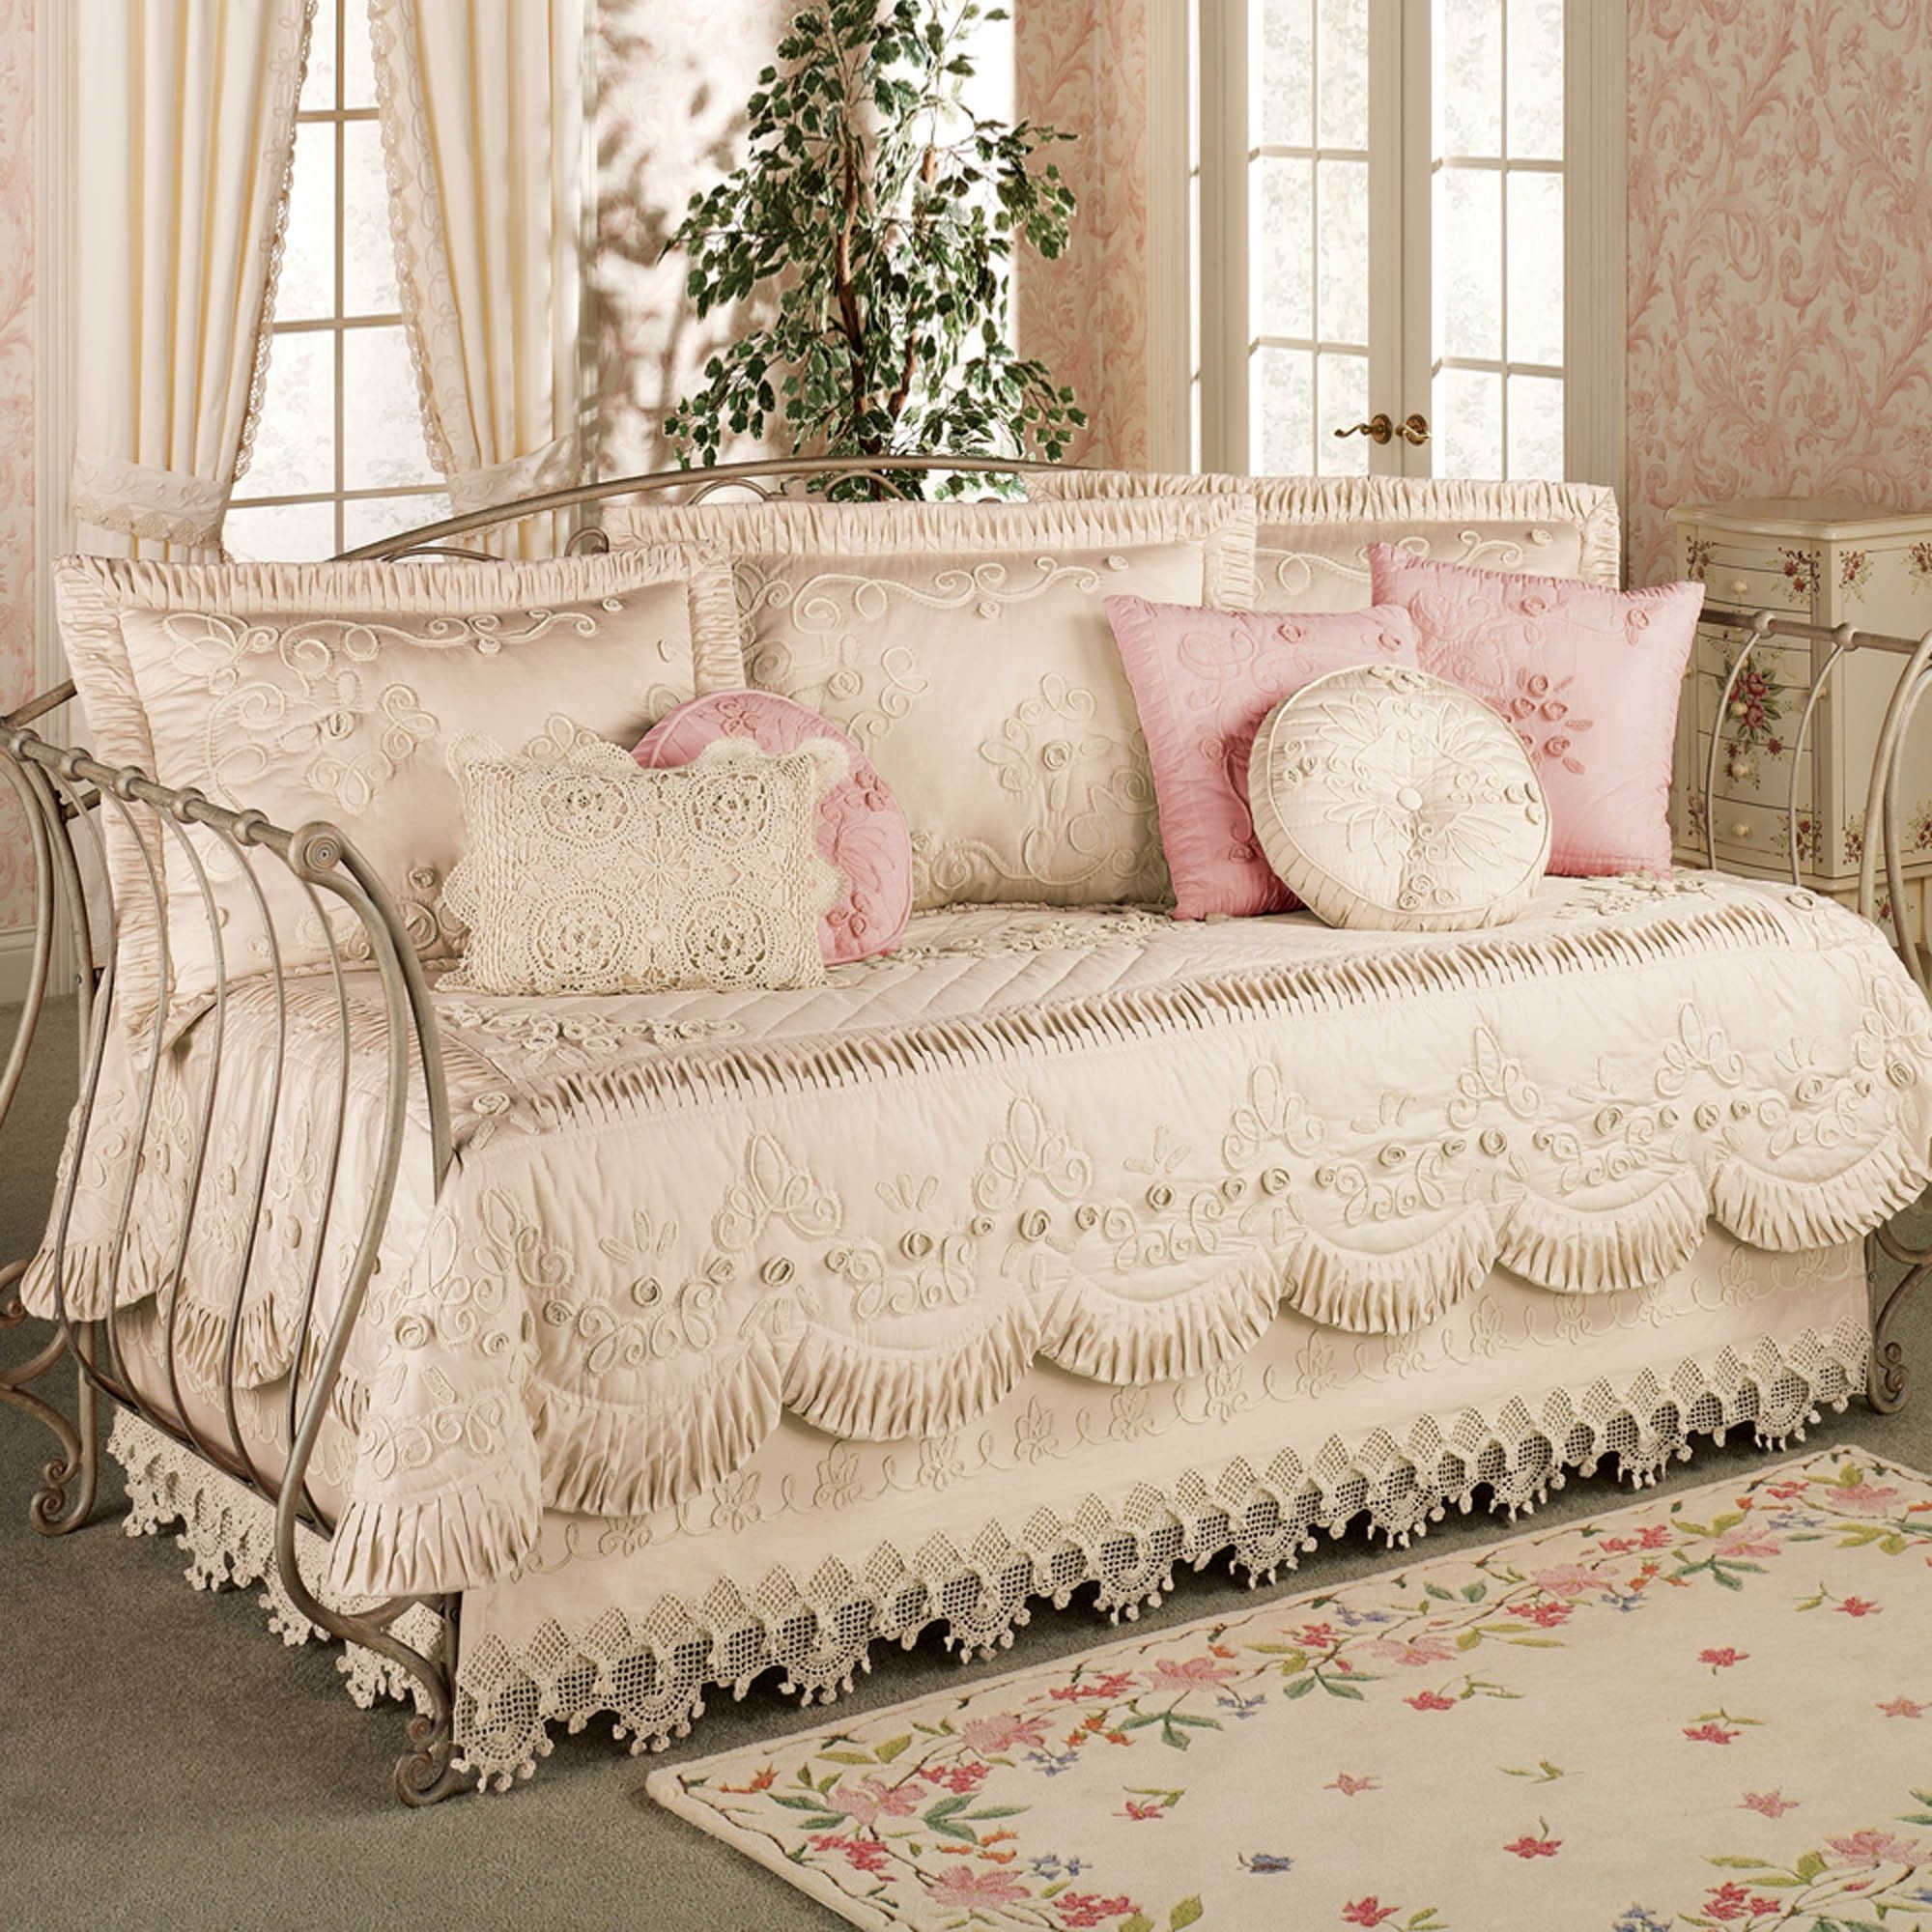 Unique Daybed Bedding Ideas On Foter